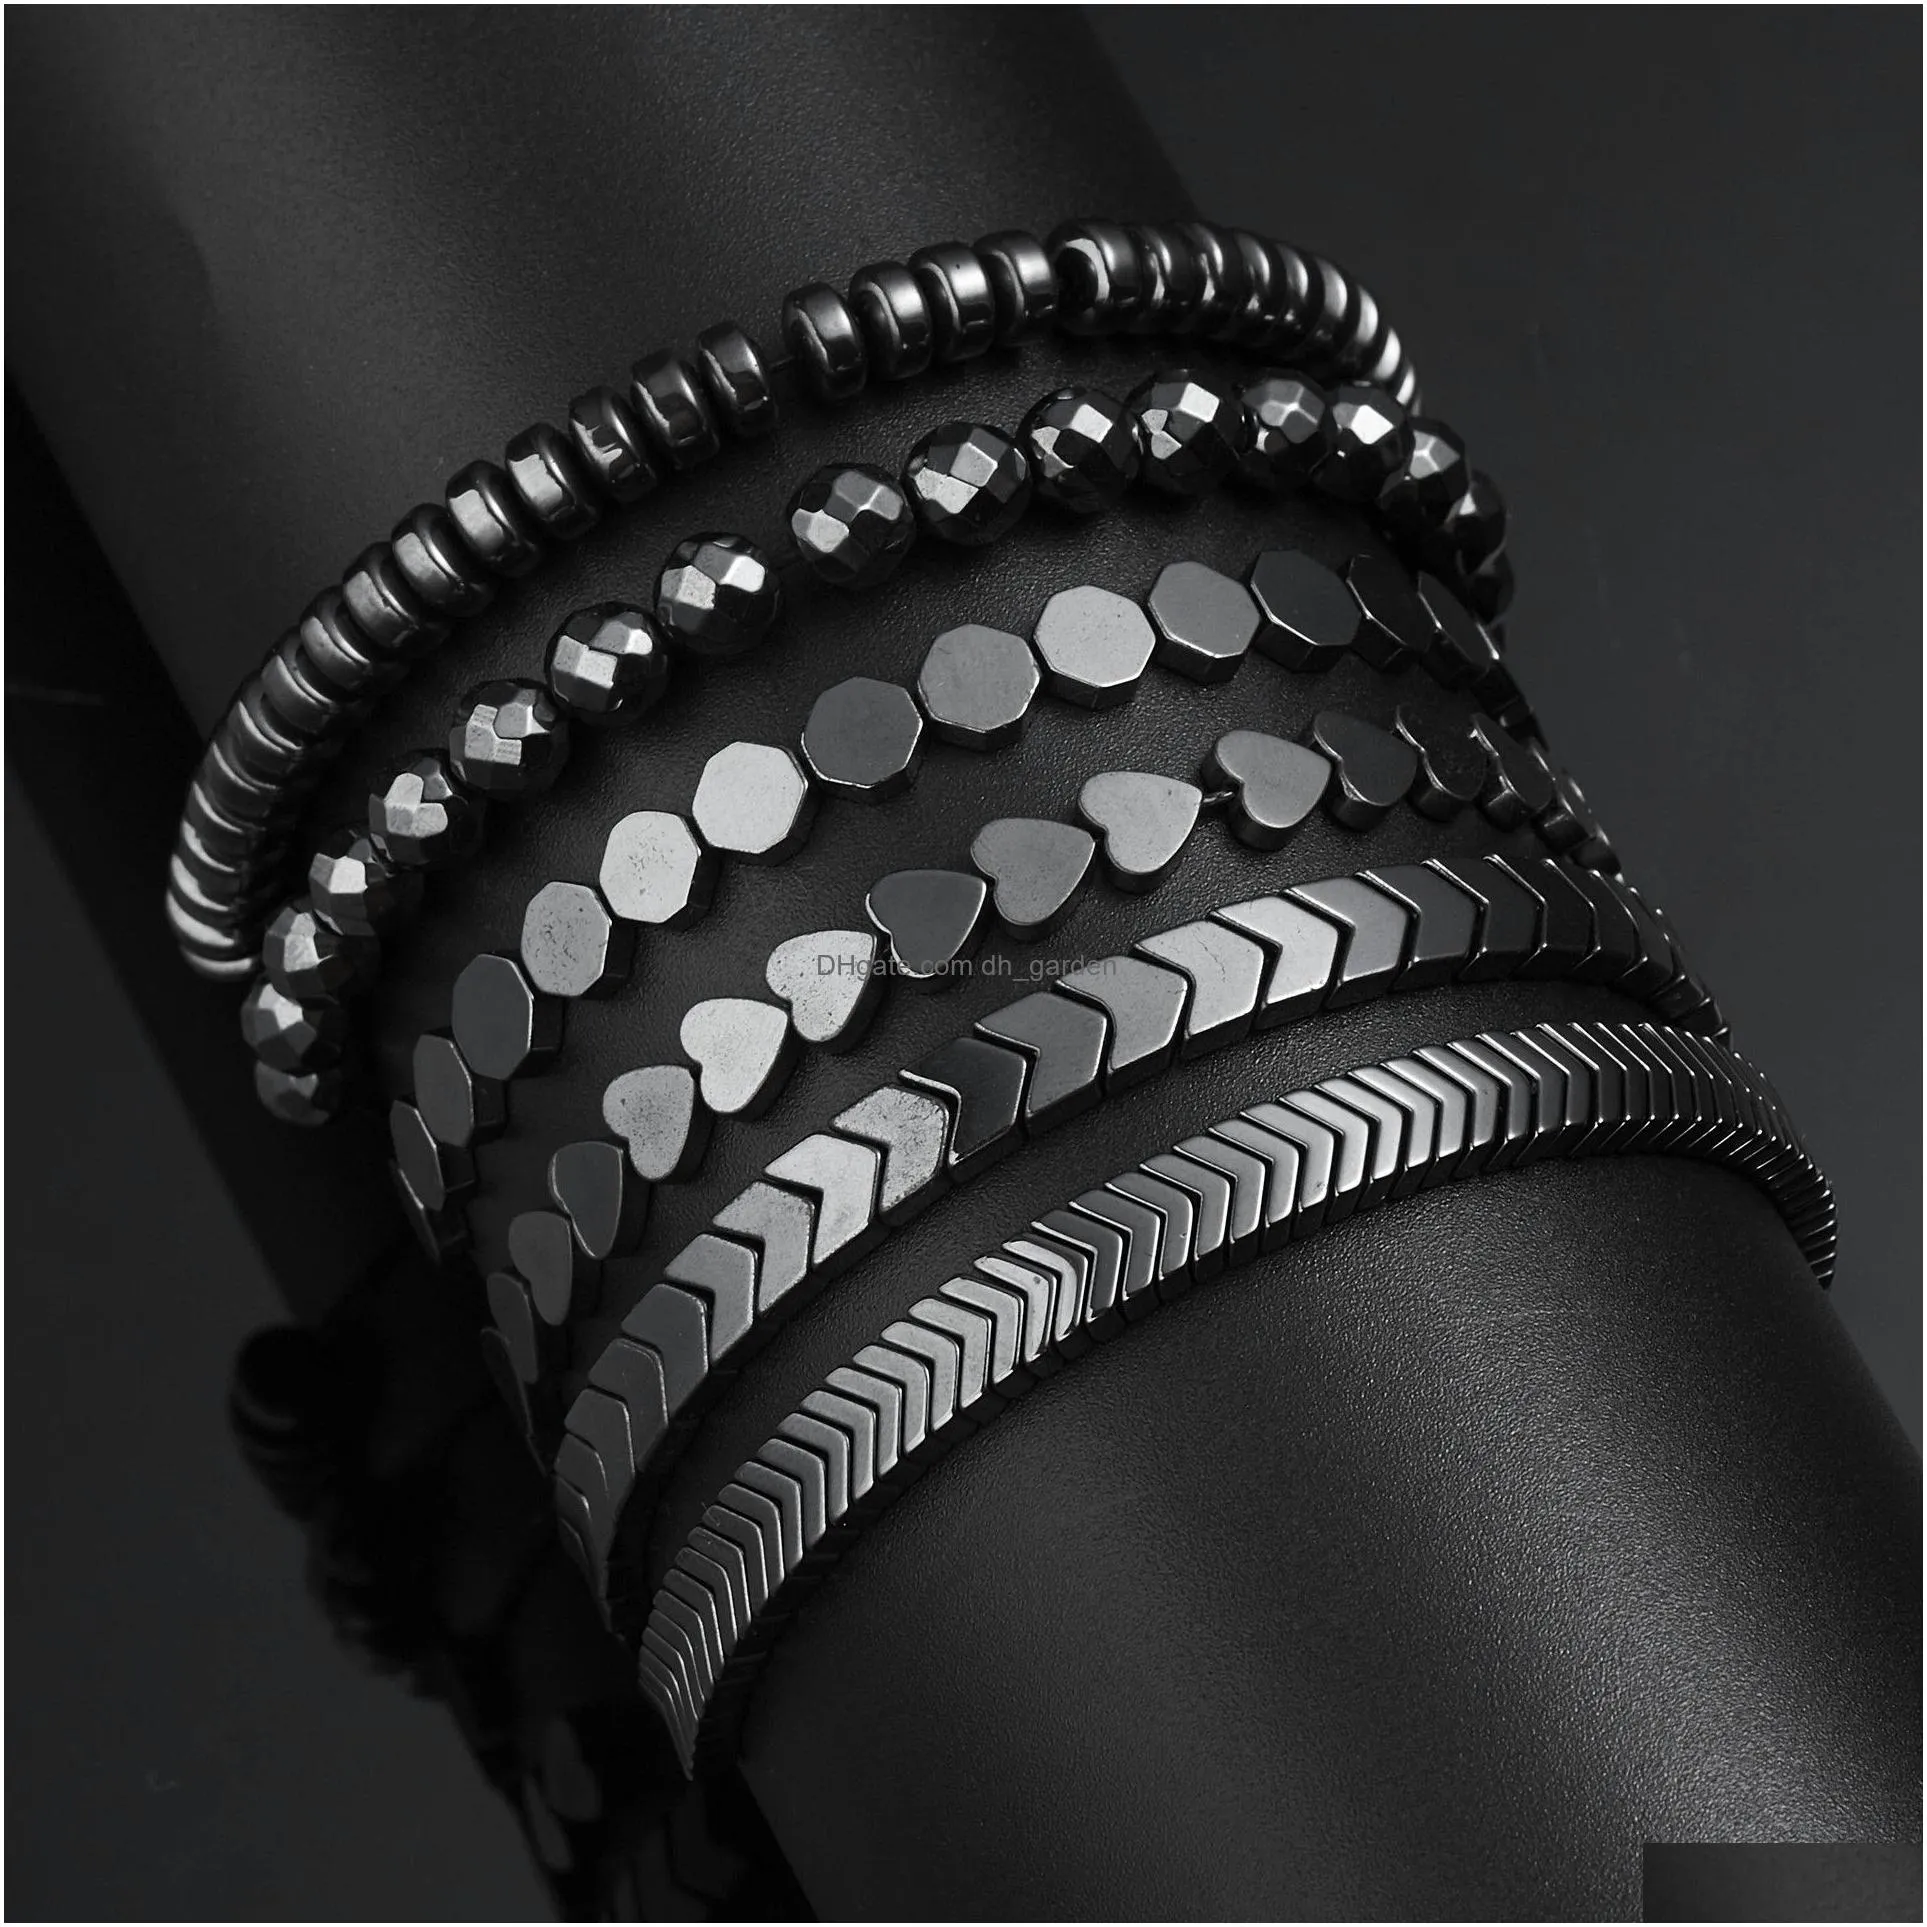 magnetic therapy health care loss weight effective black stone bracelets slimming stimulating acupoints arthritis pain relief